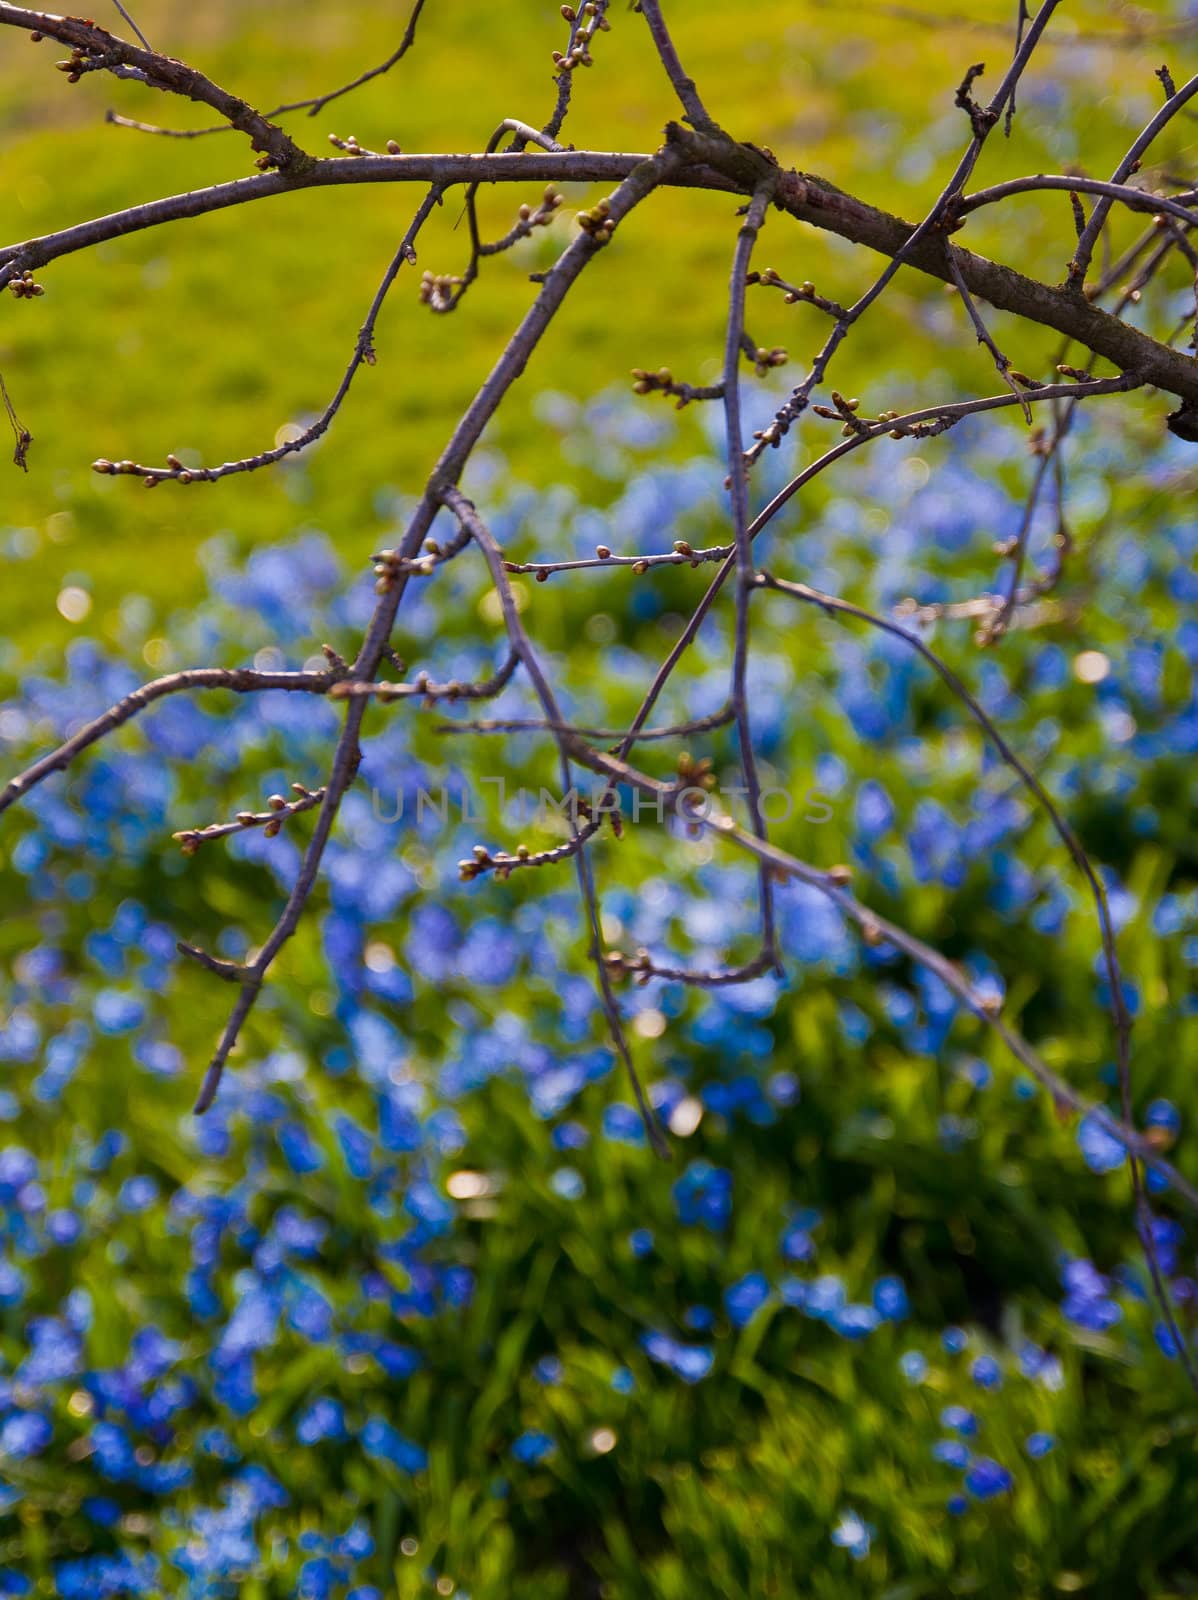 Branch and a grass field with aqua flowers